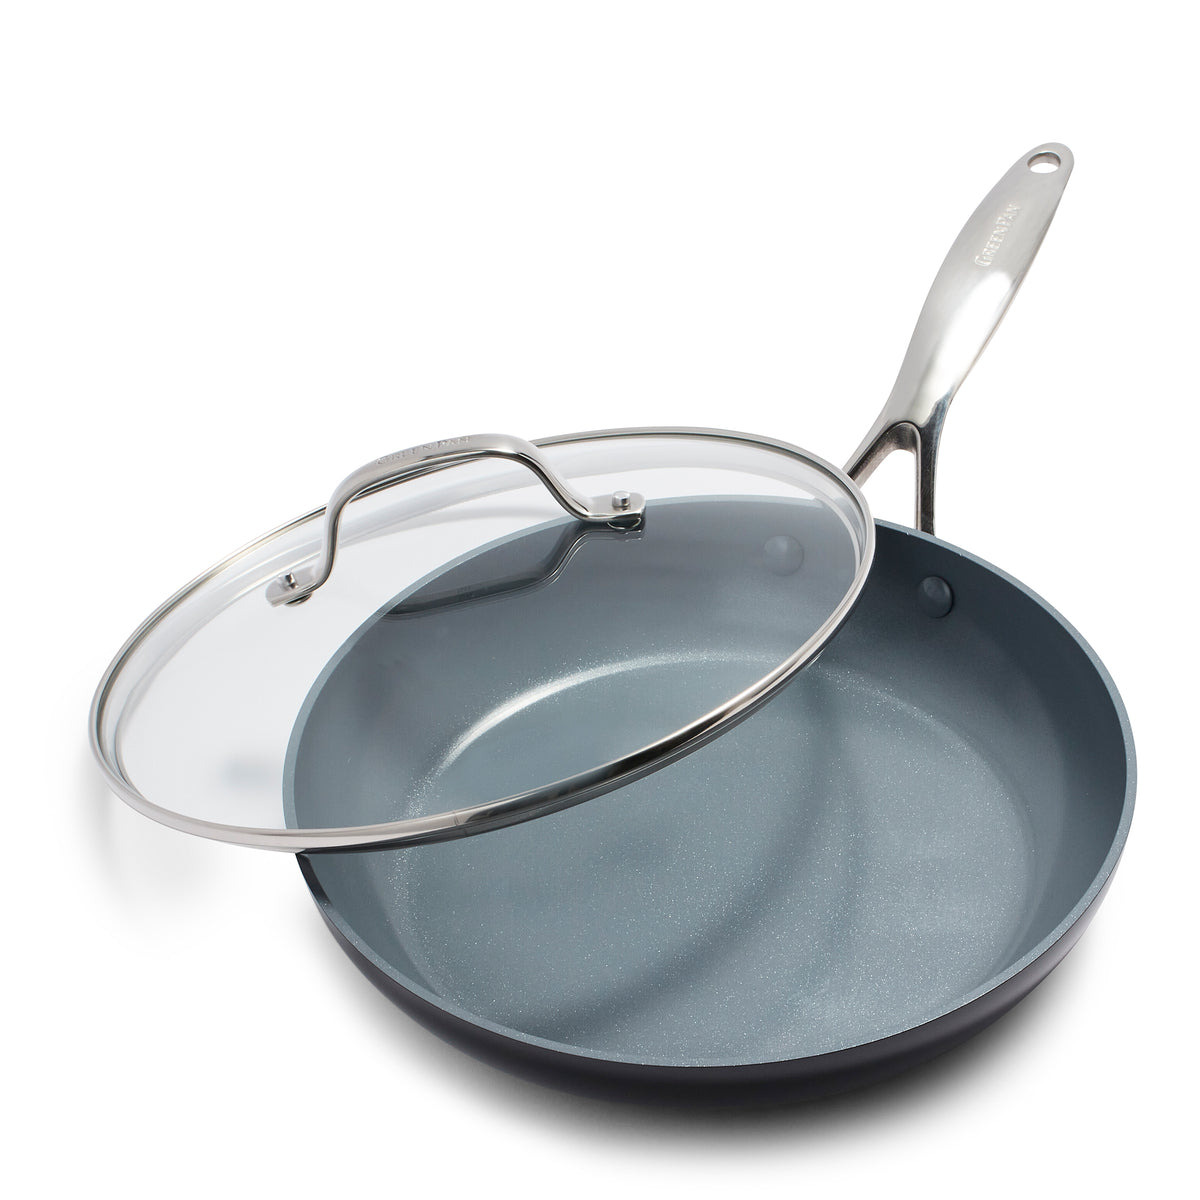 Stainless Steel Pro 10 Inch Covered Skillet